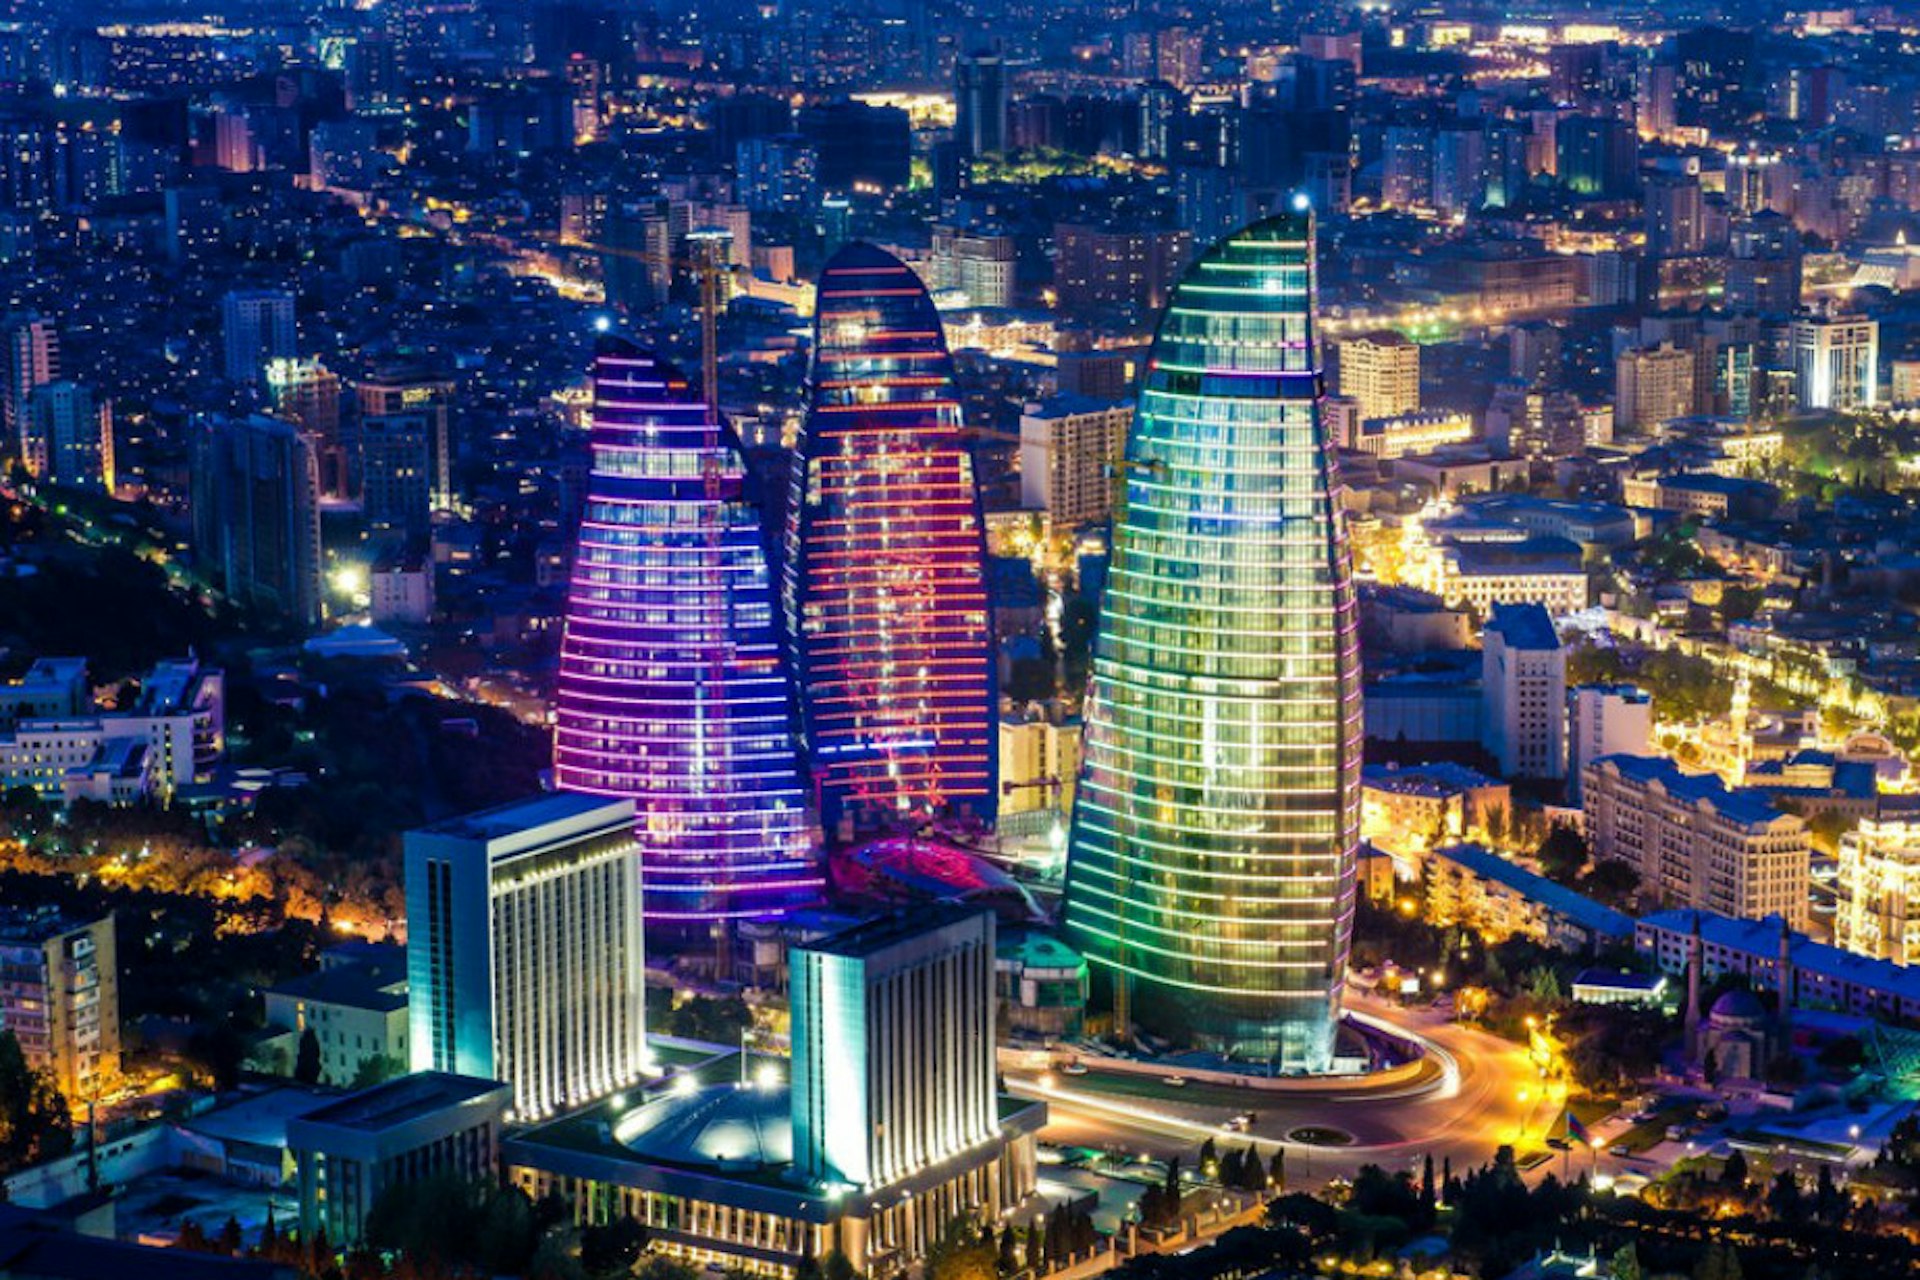 The Flame Towers are home to the Fairmont Hotel Baku. Image by Firuza / CC BY-SA 2.0